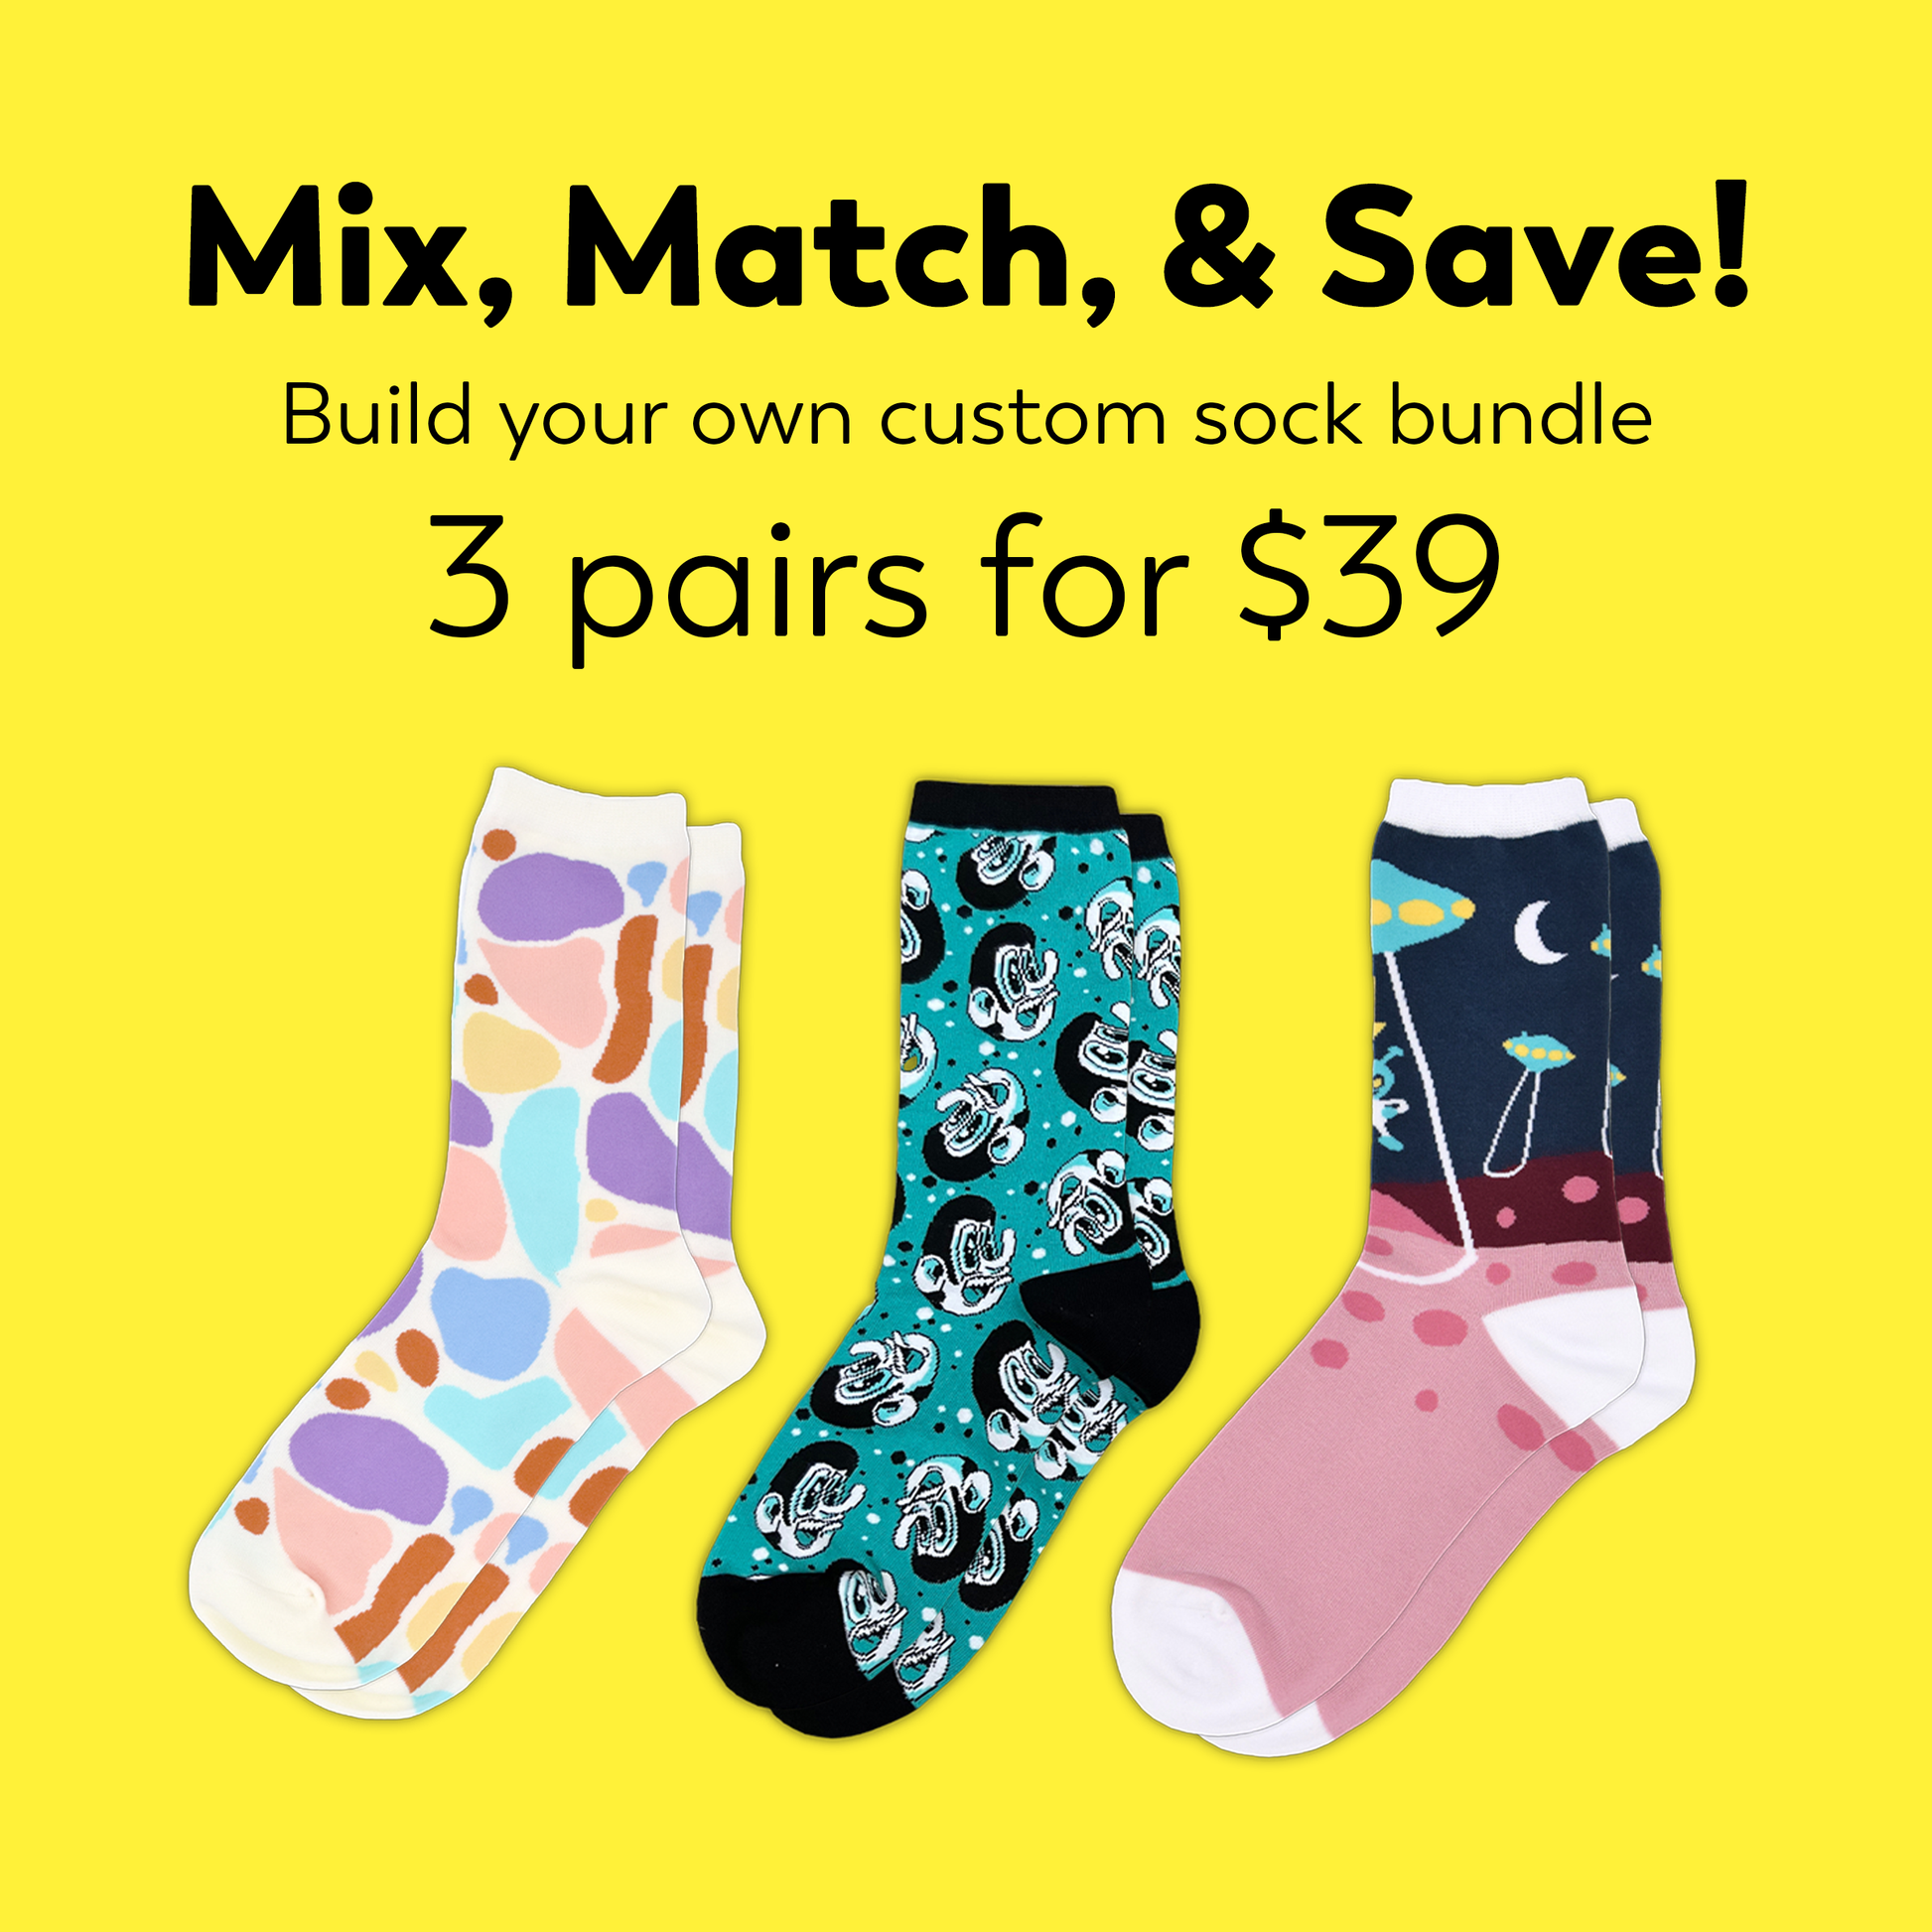 "Mix, Match & Save!; Build your own custom sock bundle. 3 pairs for $39". Text sits on top of a yellow background with three pairs of past designs from the Awesome Socks Club. A Good Store Product.